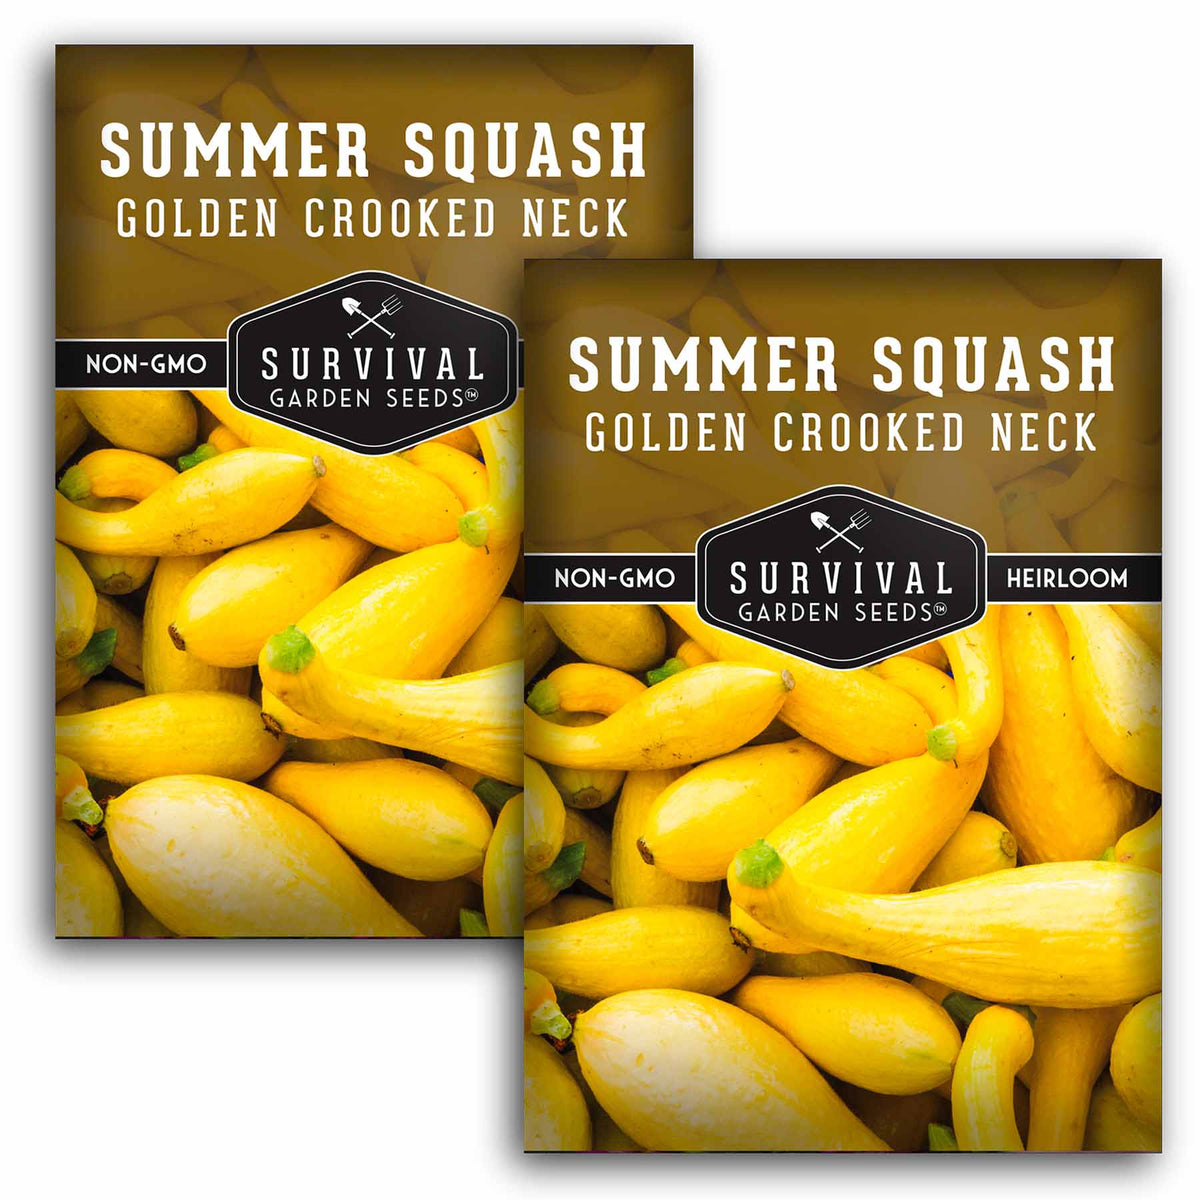 2 packets of Crooked Neck Squash seeds